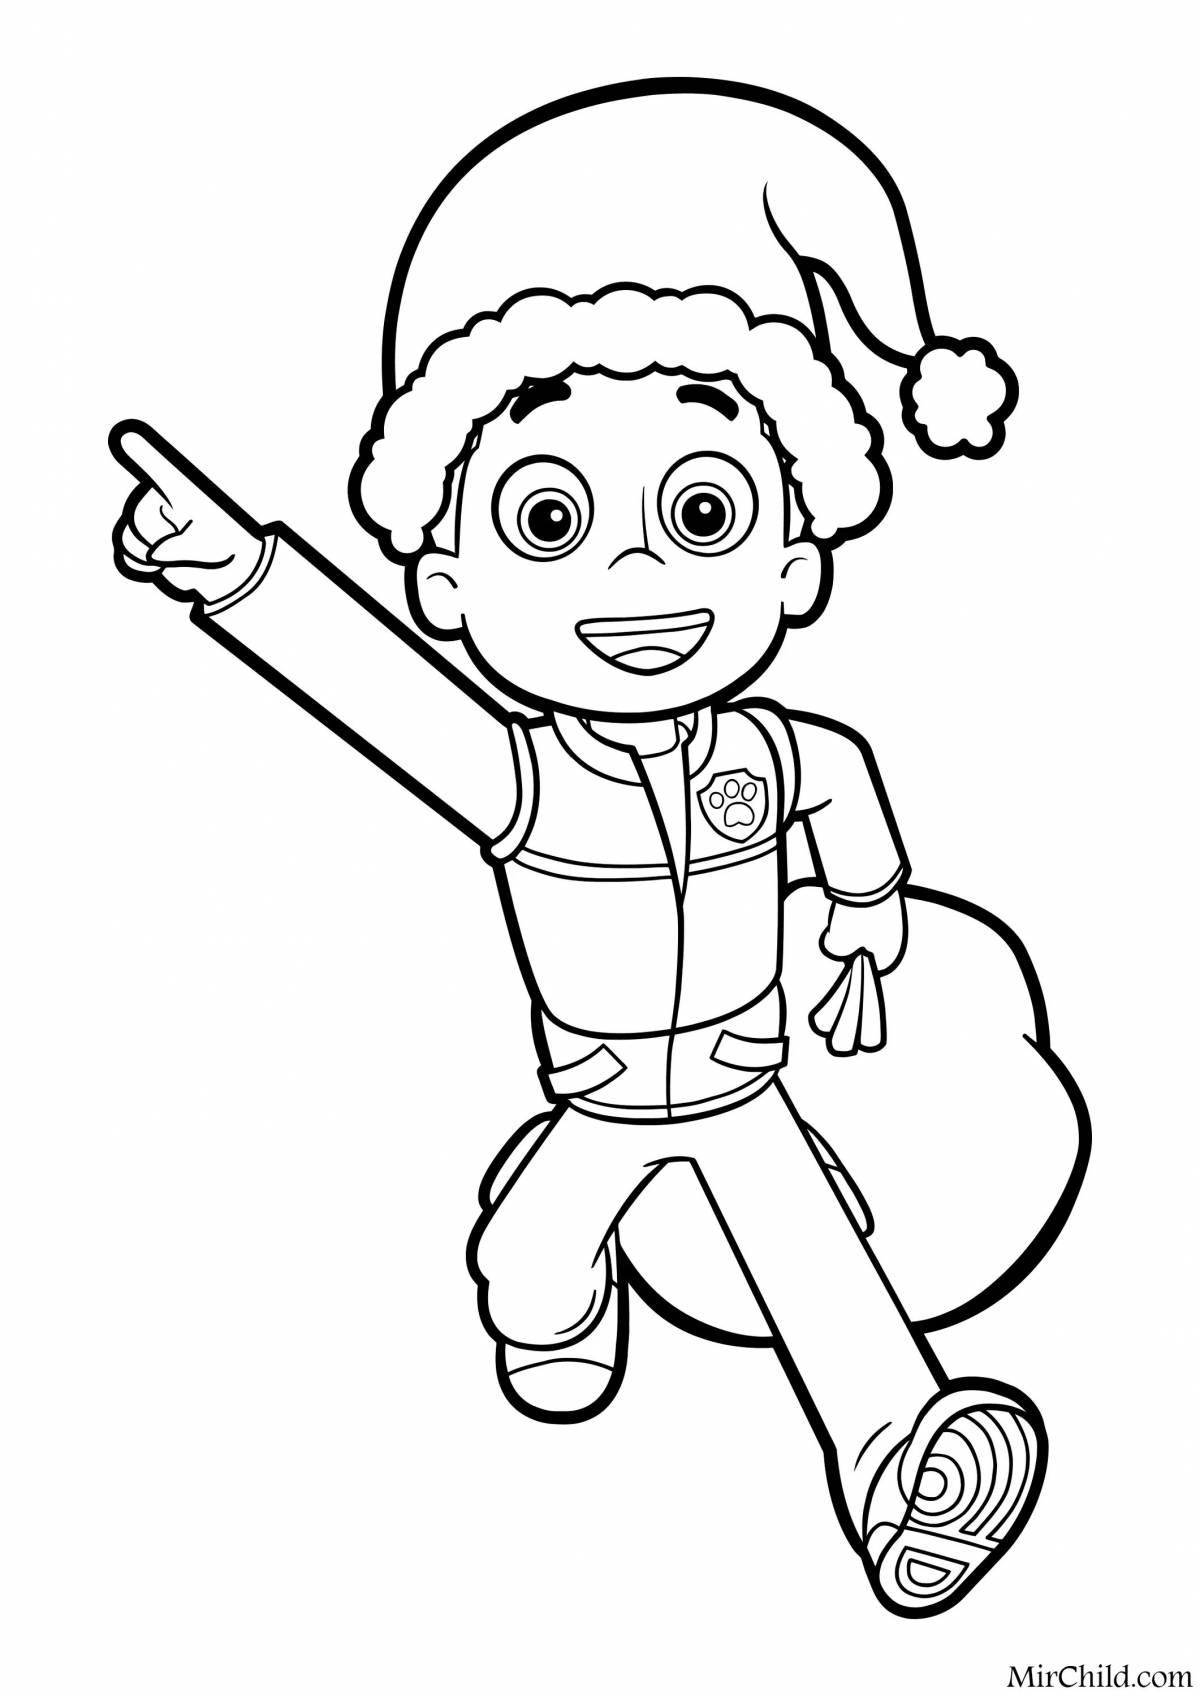 Coloring page brave rider